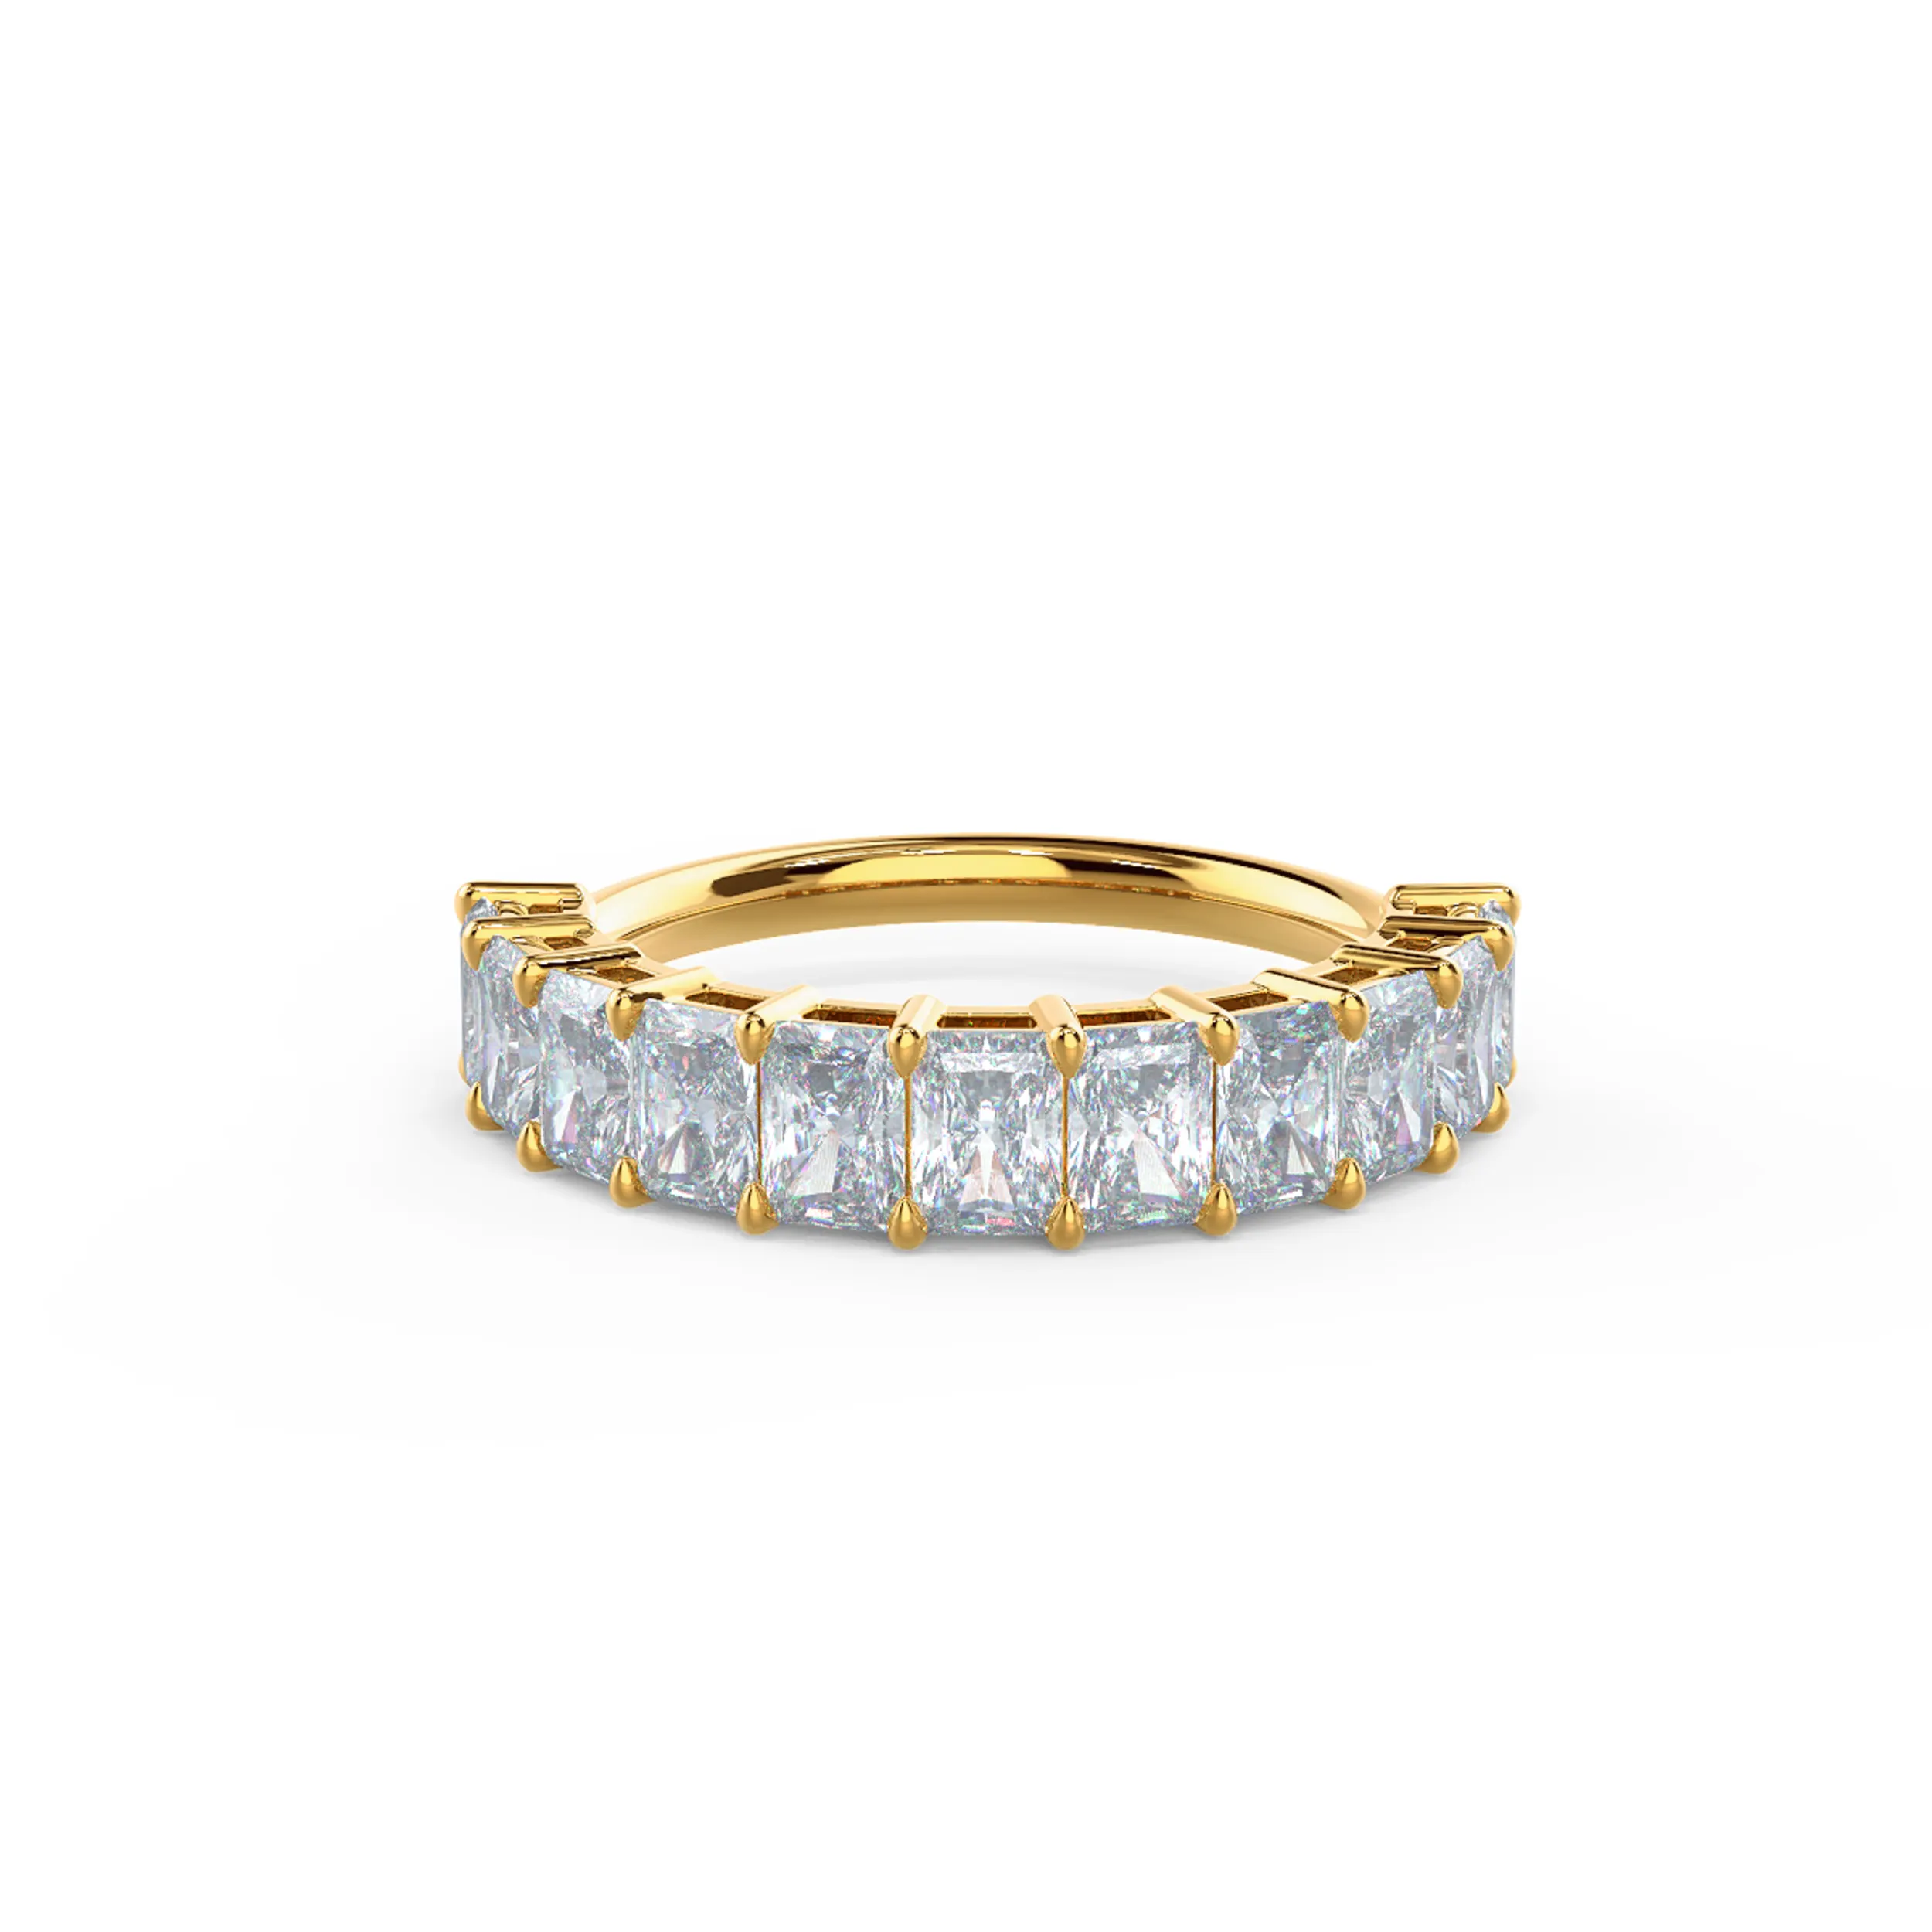 High Quality 2.2 ct Man Made Diamonds set in 14k Yellow Gold Radiant Half Band (Main View)